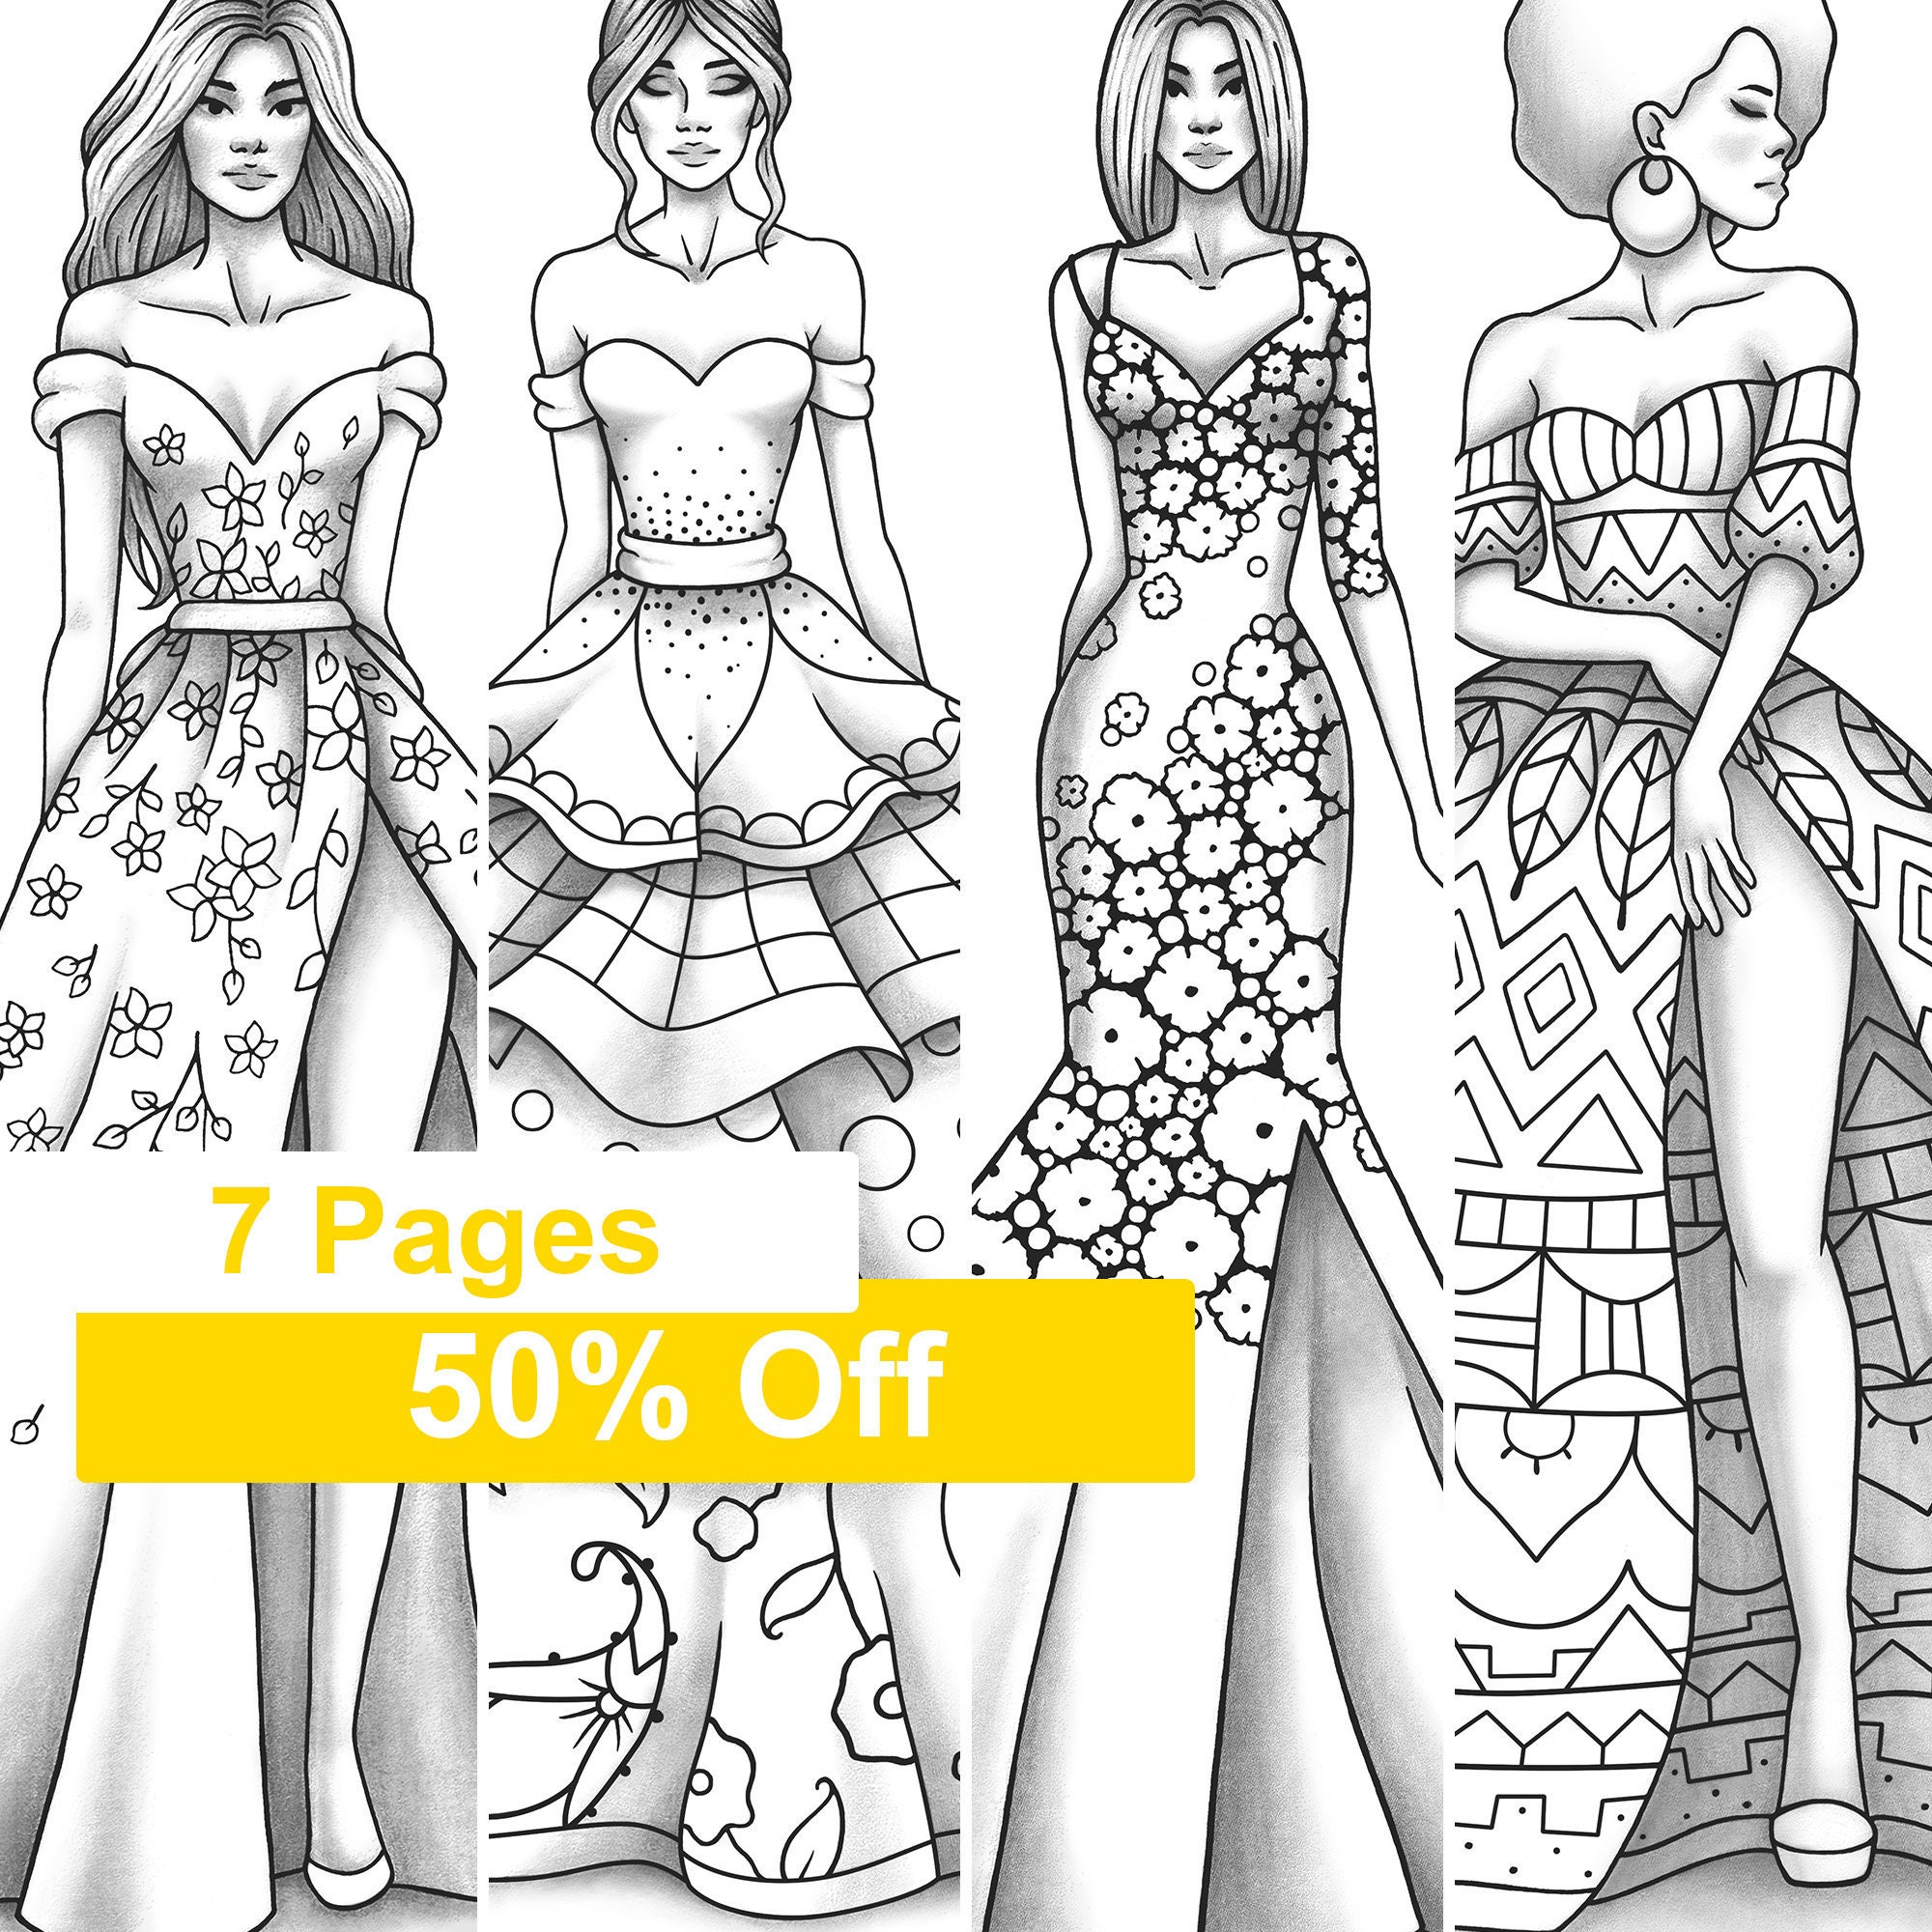 I. Introduction to Coloring Books and the World of Fashion